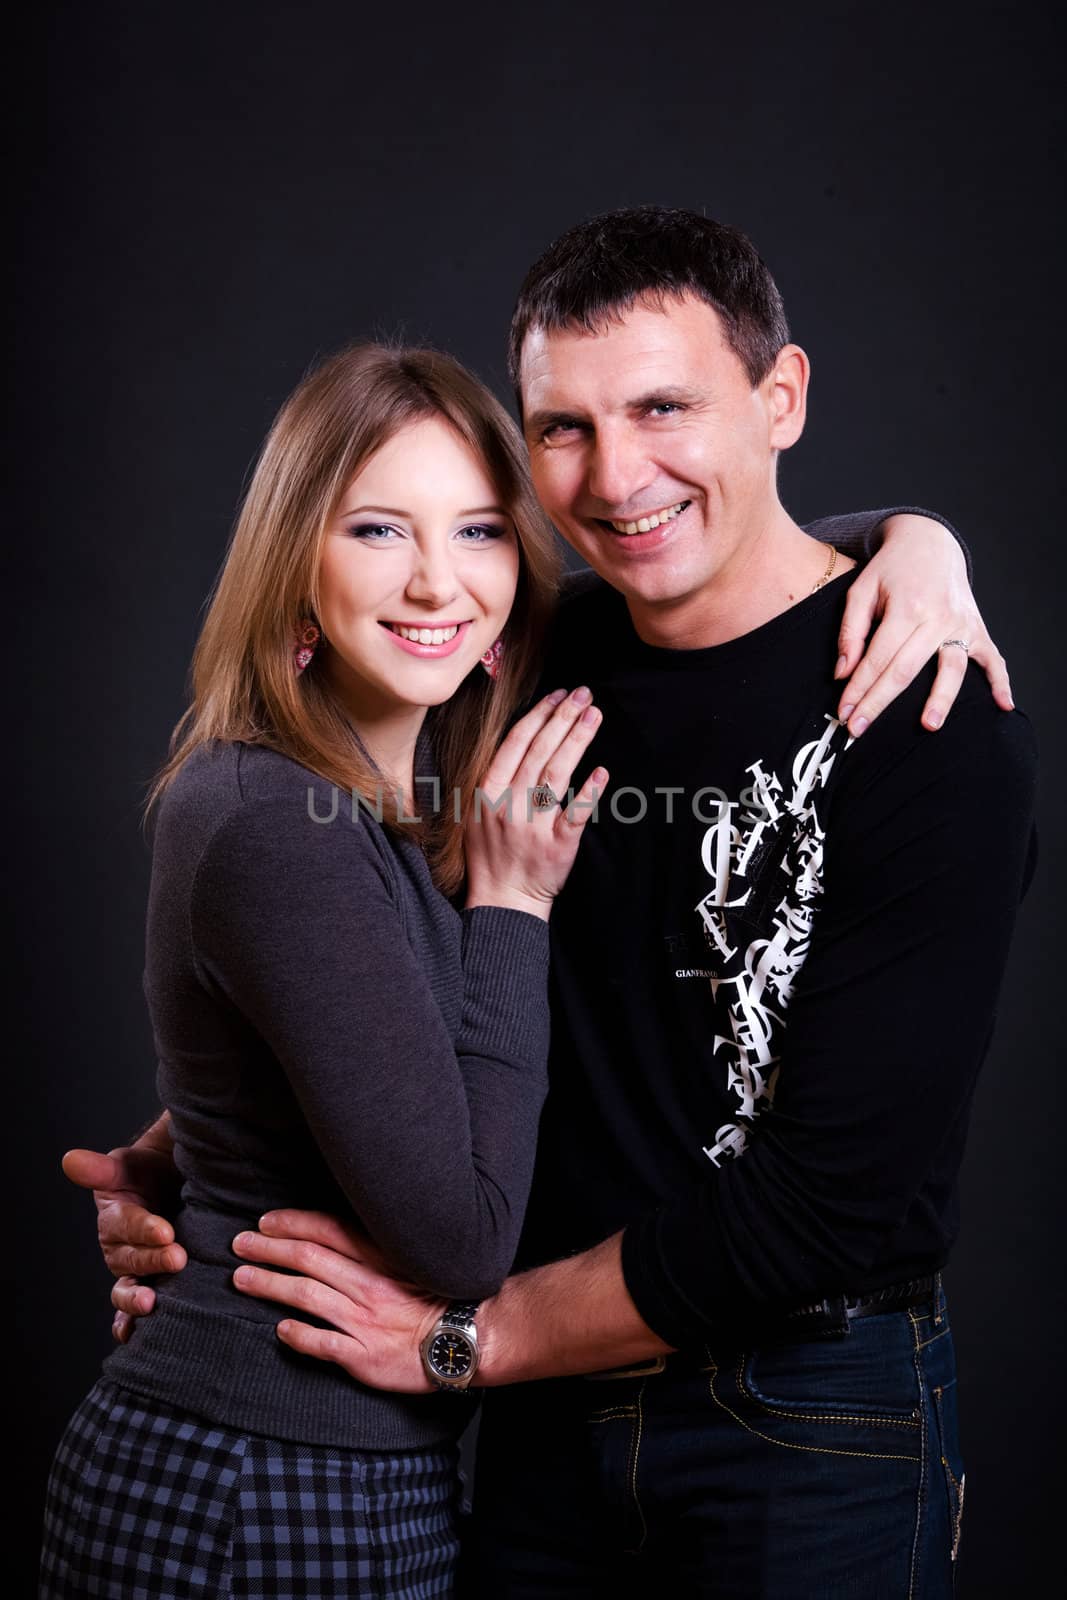 middle-aged man with grown-up daughter